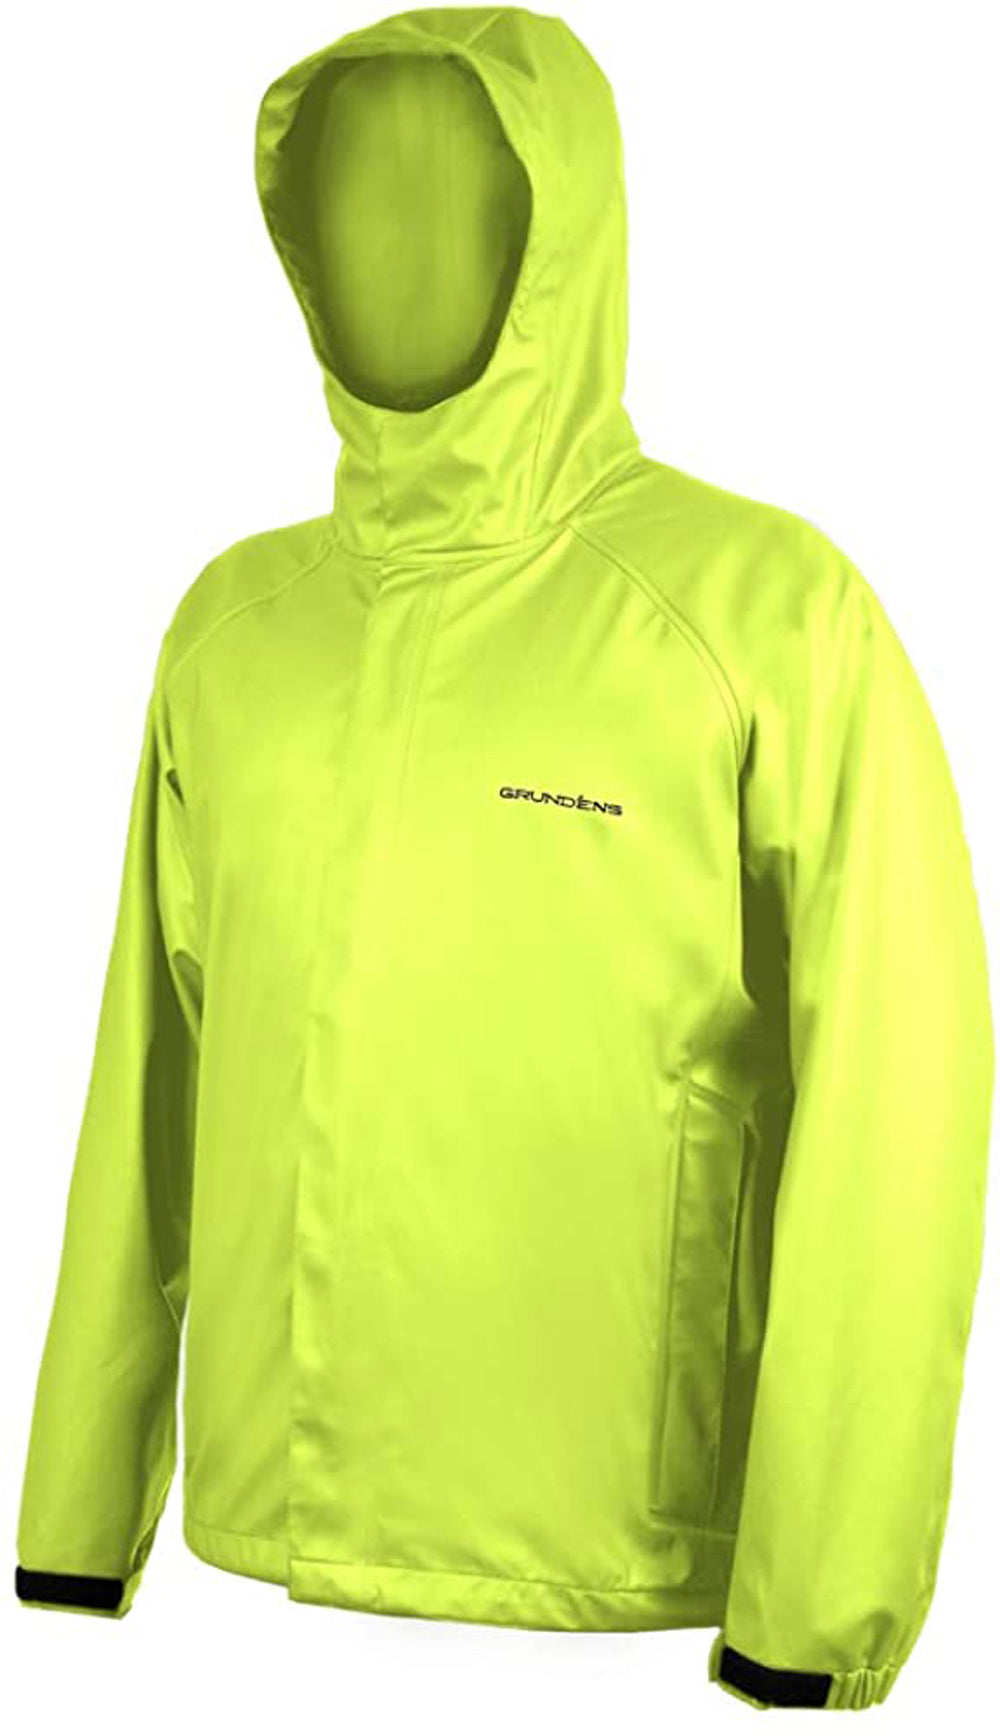 Neptune Jacket in Hi Vis Yellow color from the front view